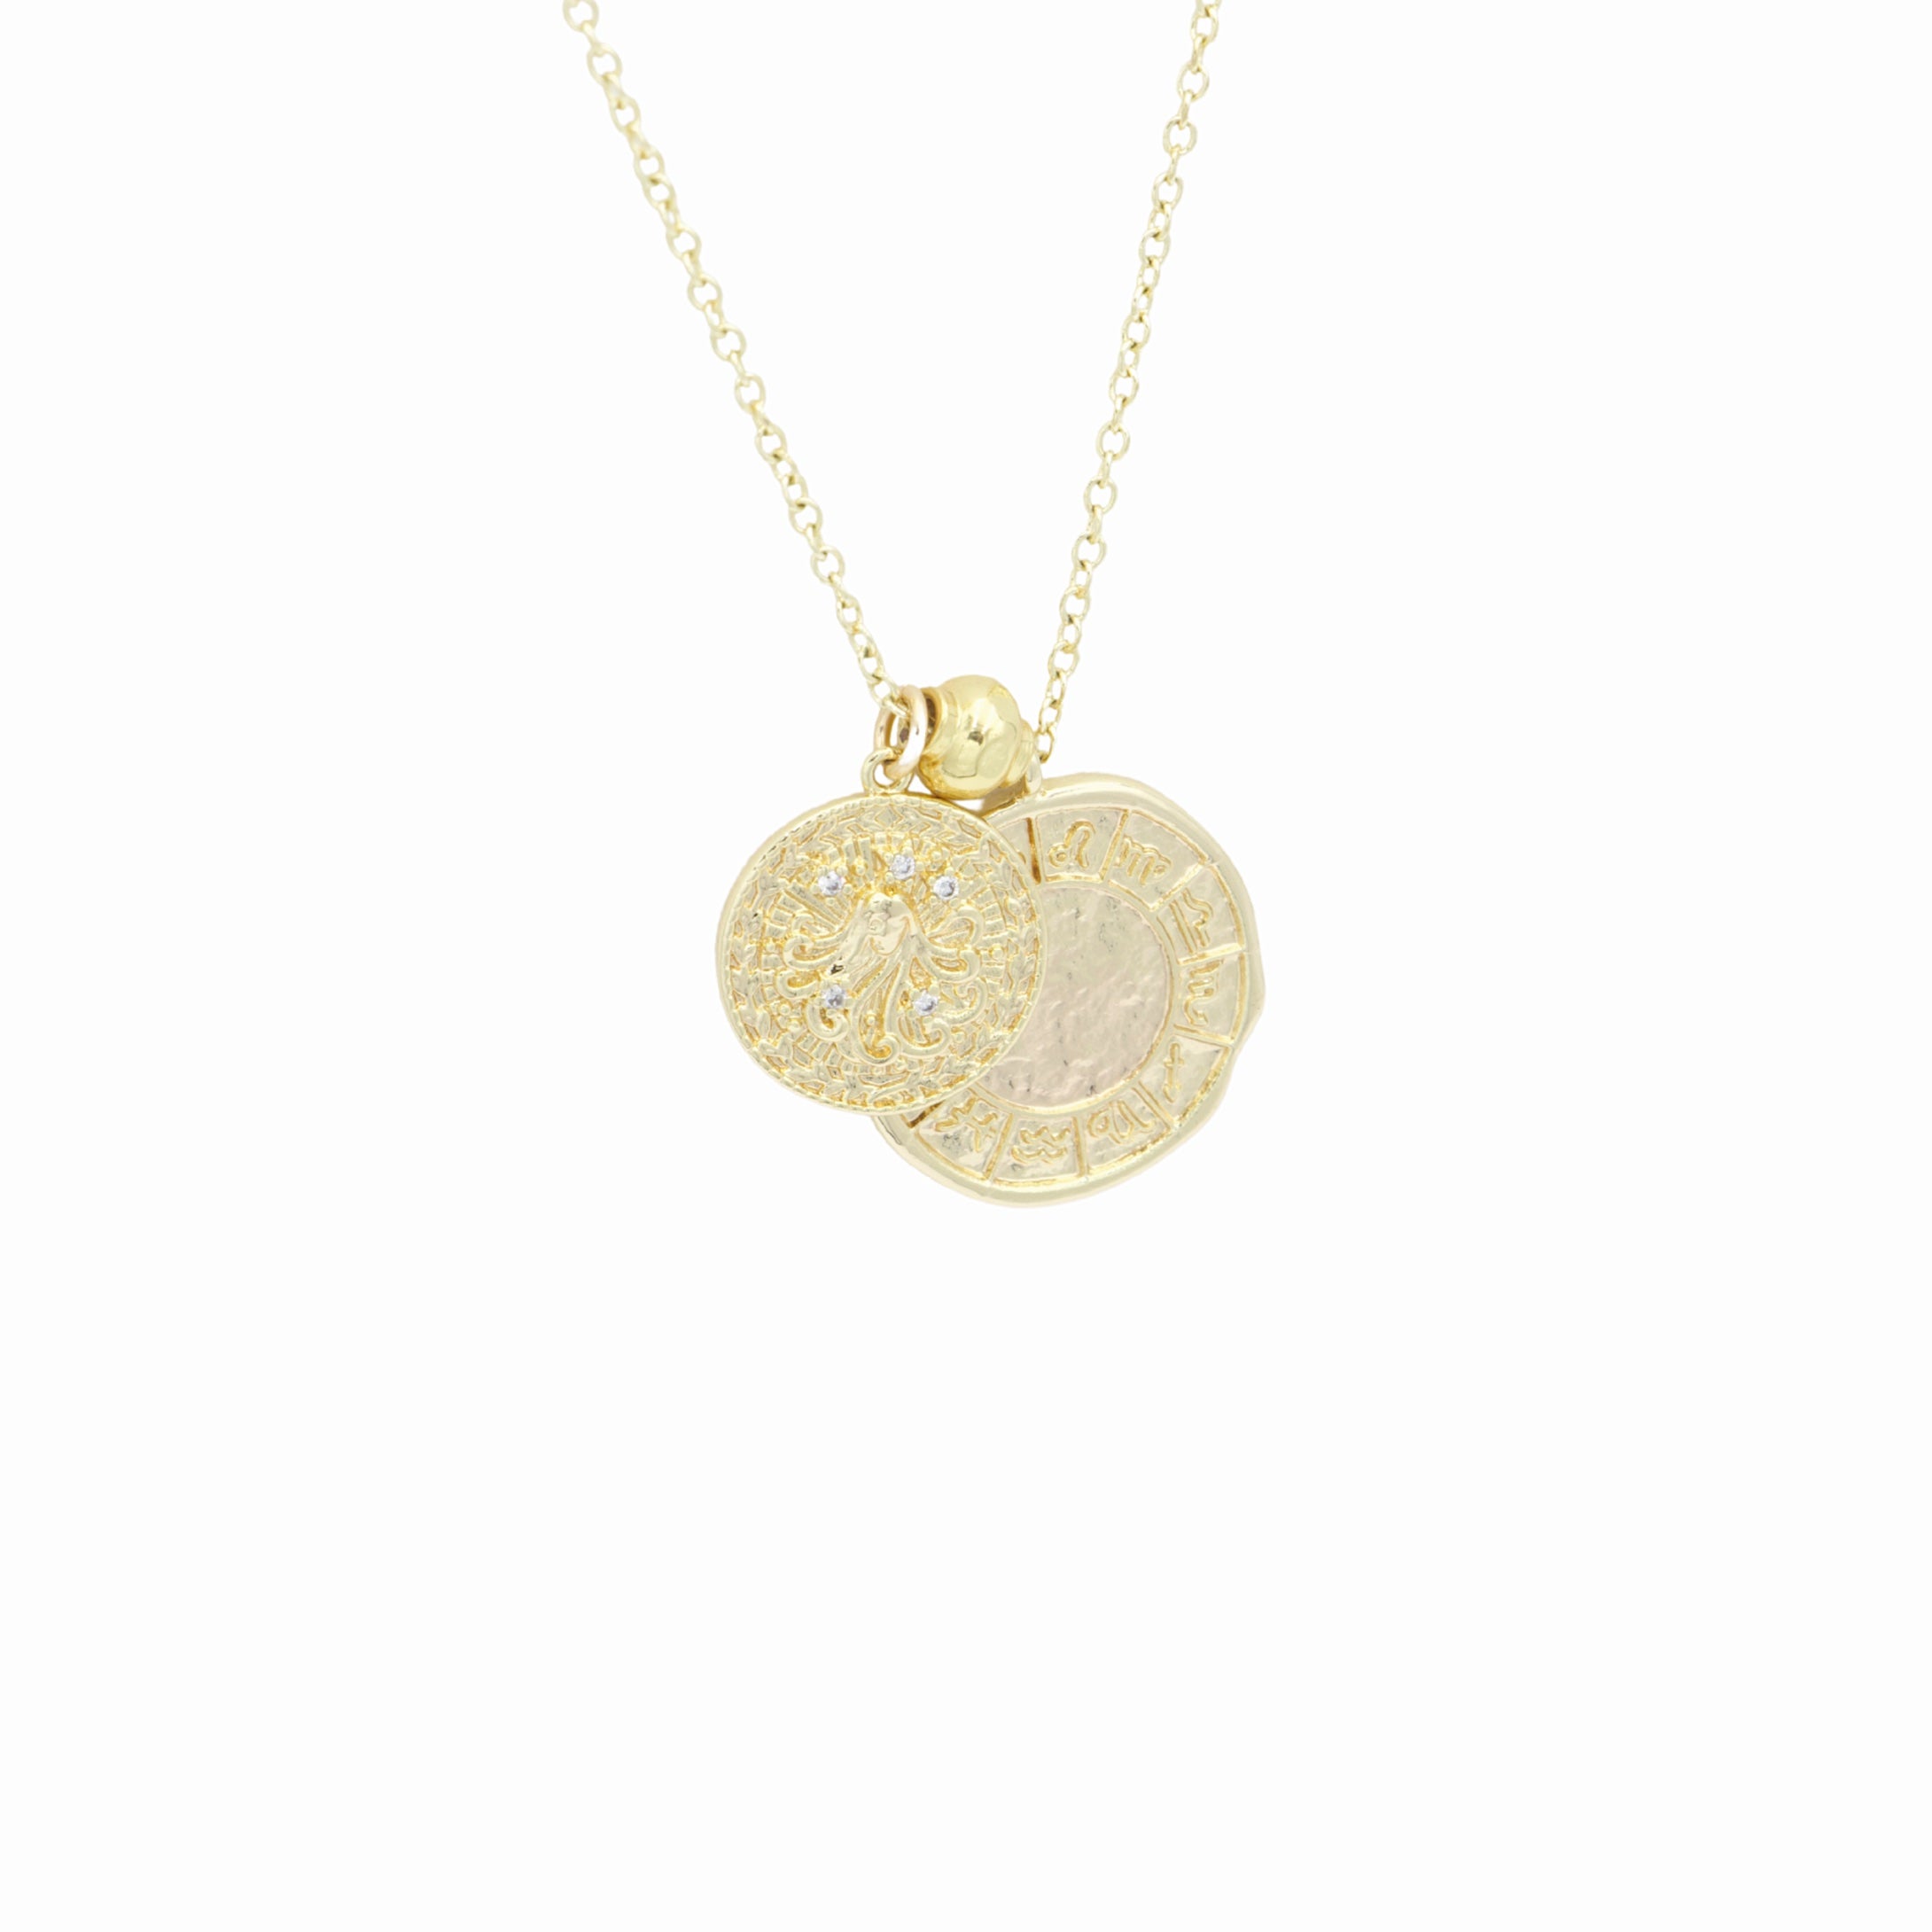 AW Boutique's dual zodiac coin necklace featuring a dainty necklace chain, zodiac rustic coin charm, and your chosen star sign coin charm. Charms separated by a gold bead. Part of the Celestial Collection. Gold filled jewellery. Option shown is Virgo.